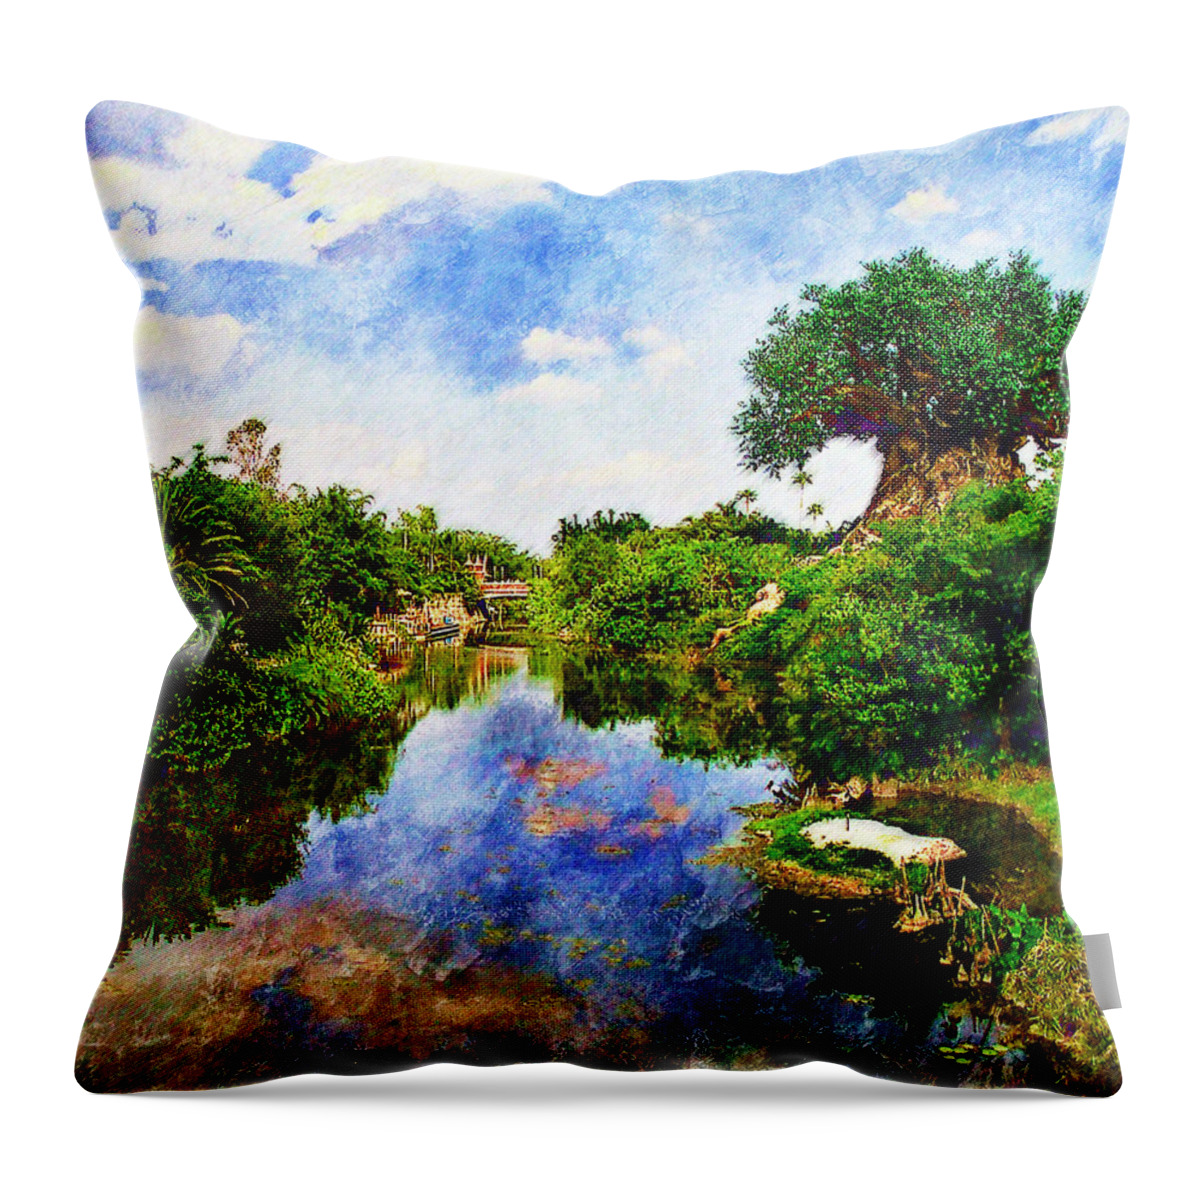 Landscape Throw Pillow featuring the digital art Animal Kingdom Tranquility by Sandy MacGowan